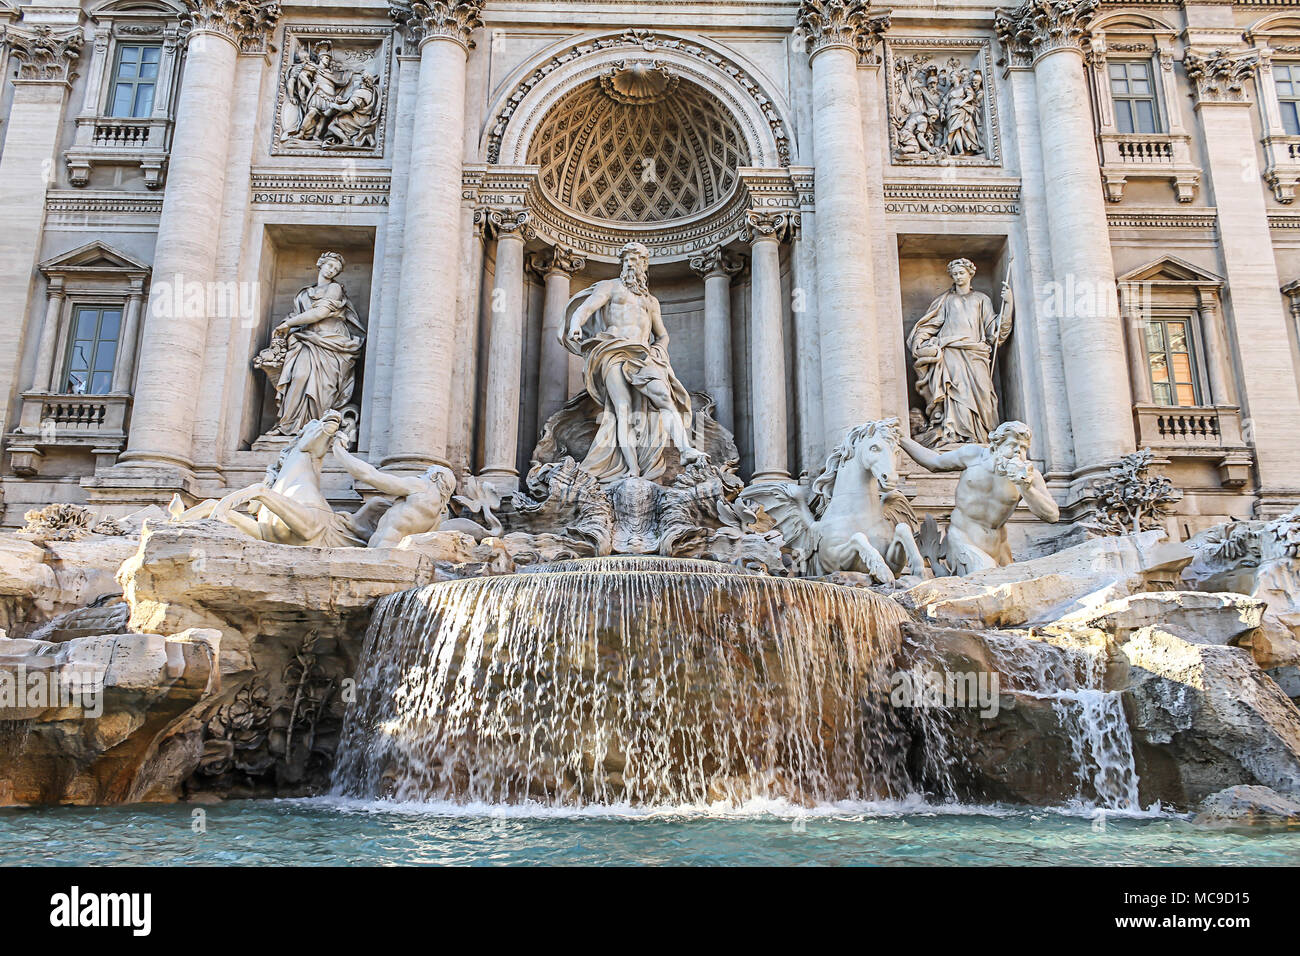 Trevi Fountain in Rome, Italy. Famous landmark fountain di Trevi close up front view of facade and statues. Stock Photo